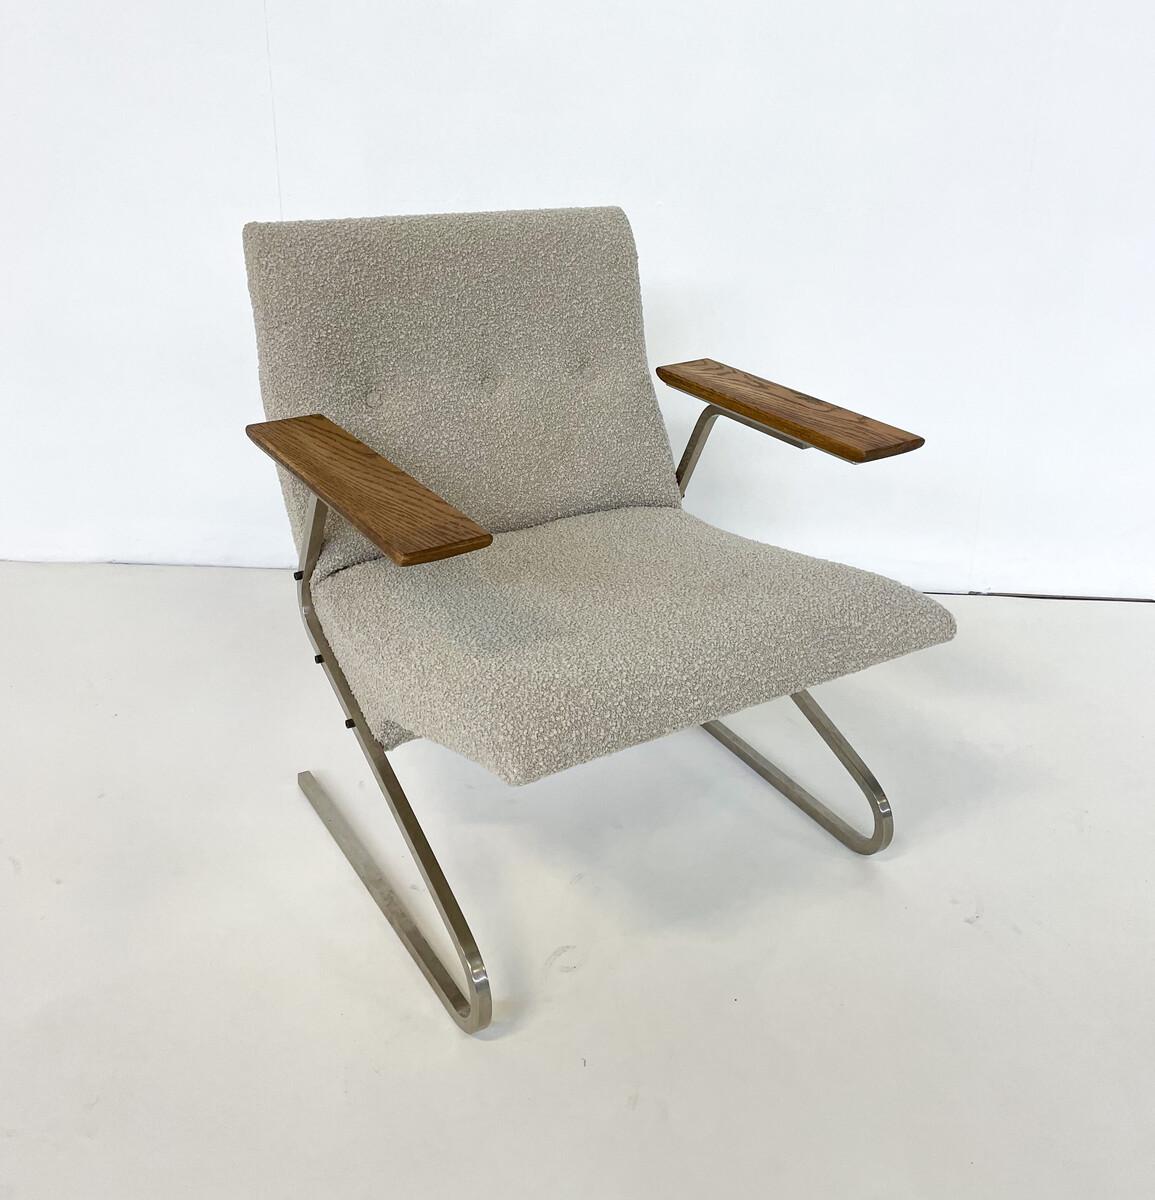 Mid-Century Modern Armchair ‘Cantilever’ by George van Rijck for Beaufort  For Sale 1